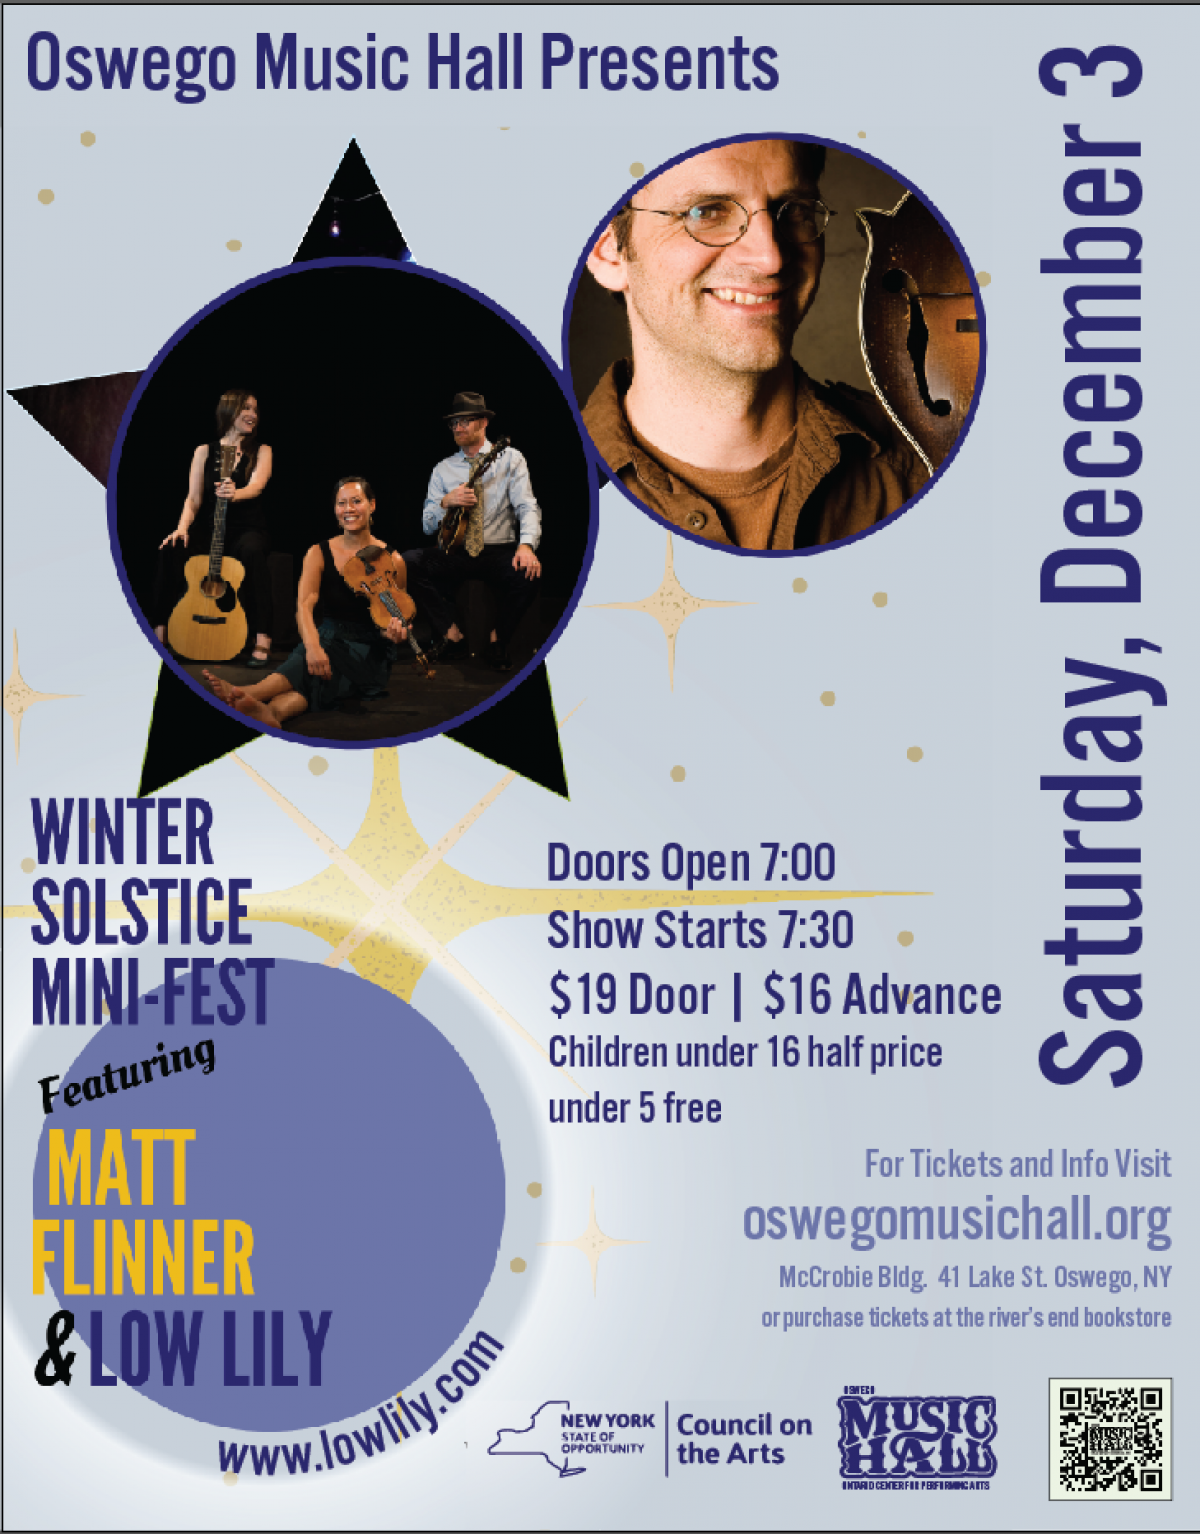 Winter Solstice Mini-fest at the Oswego Music Hall 